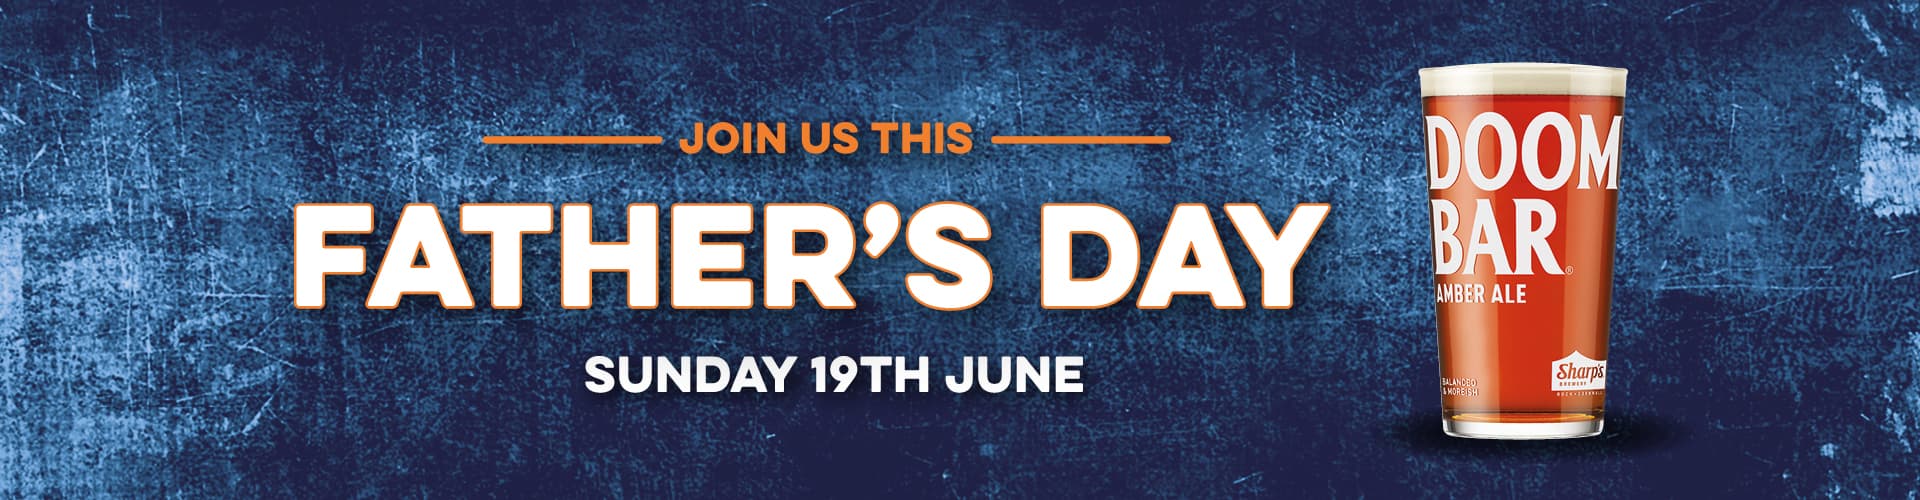 Father's Day at Noahs Ark pub in Plymouth